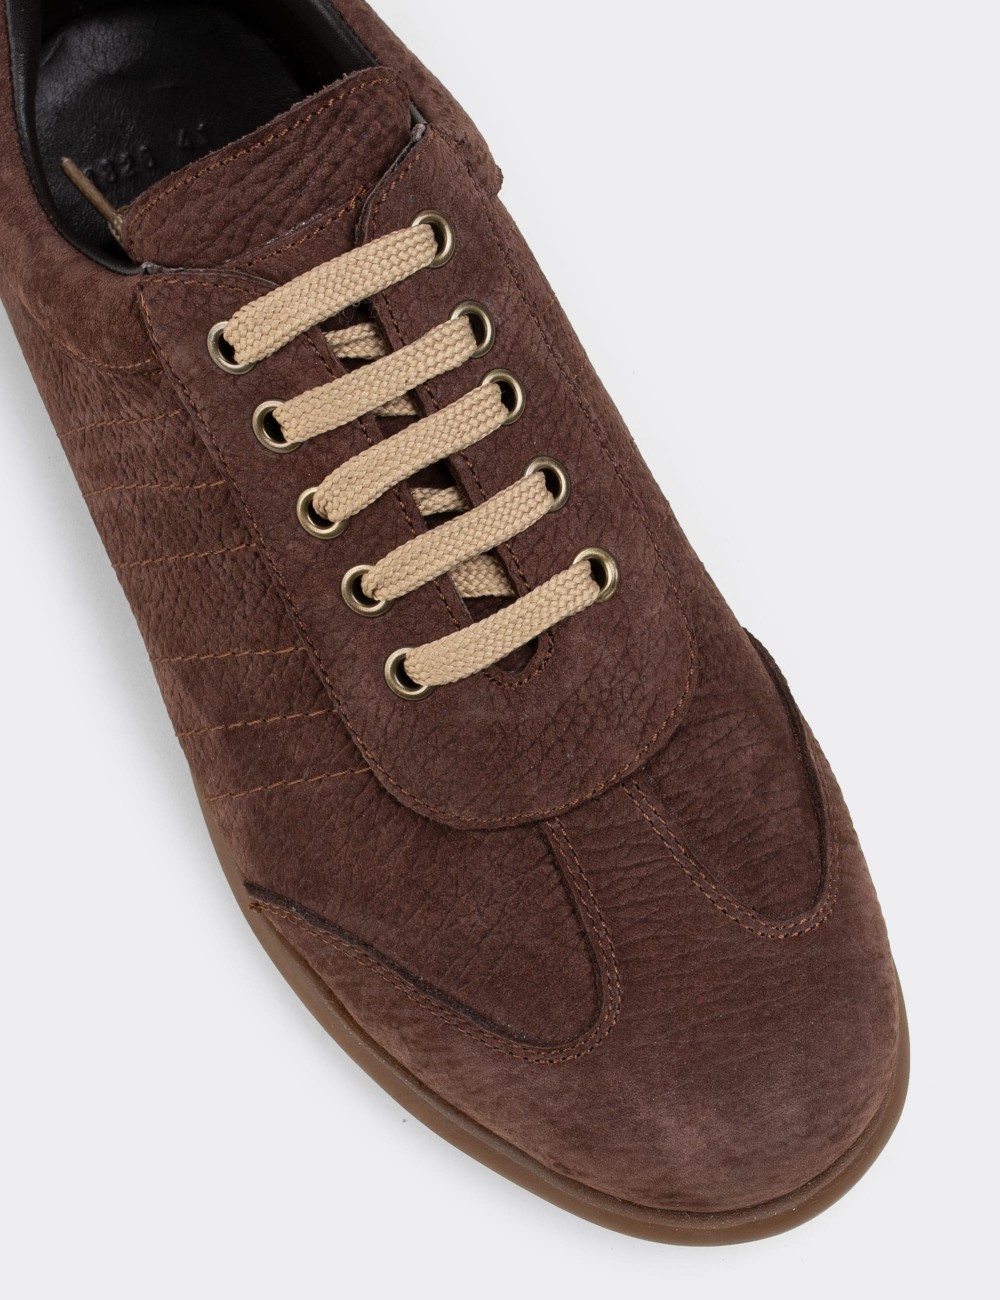 Brown Nubuck Leather Lace-up Shoes - 01826MKHVC04